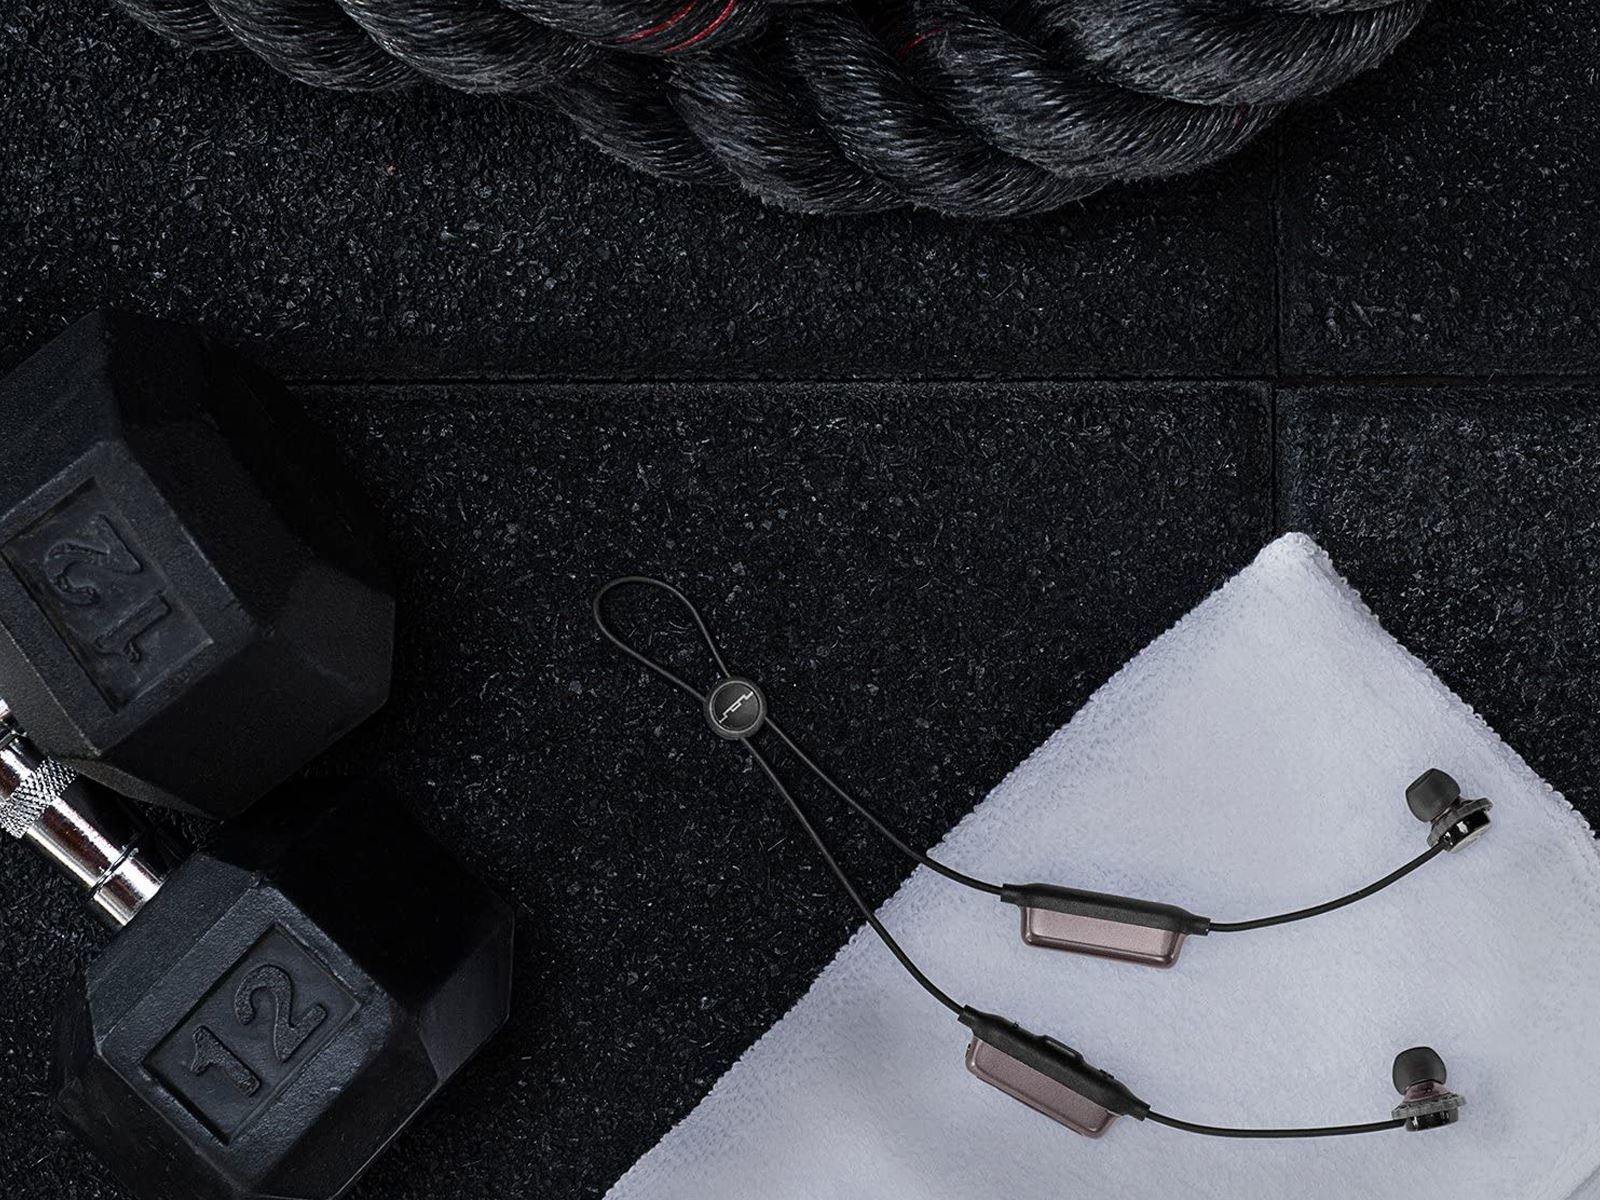 A photo of the headphones lying on the mat in the gym next to the dumbbells